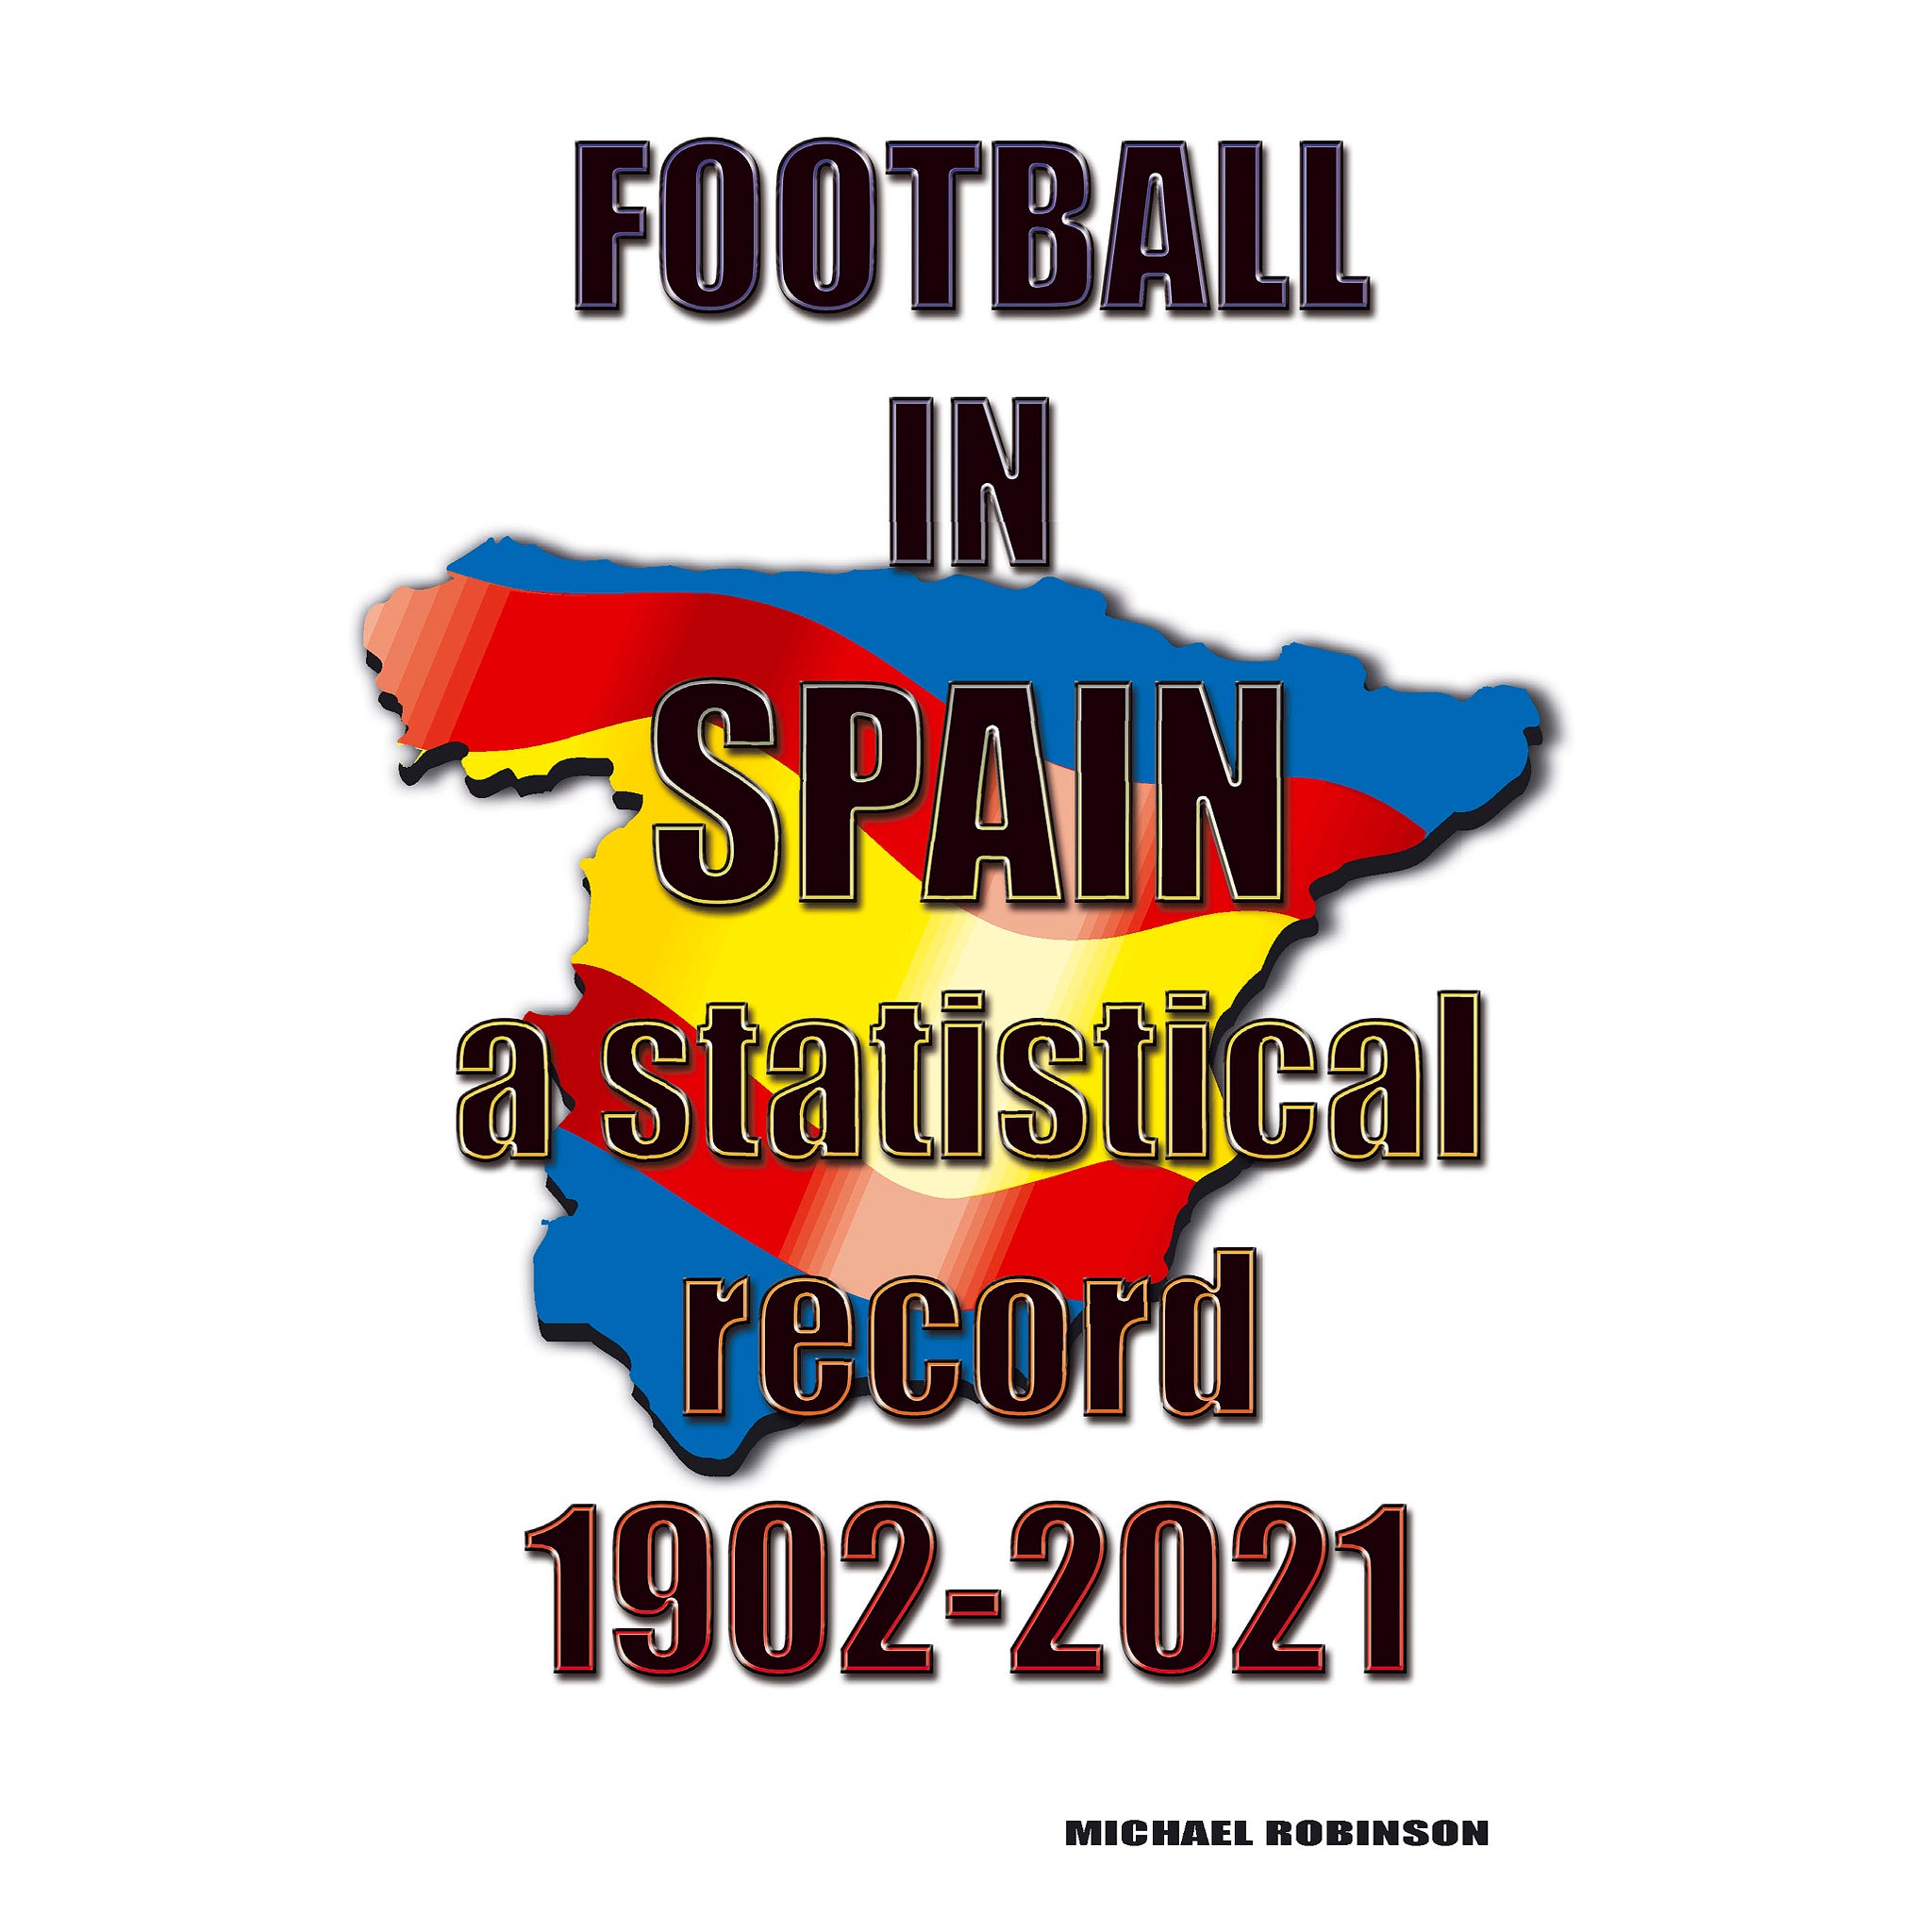 Football in Spain – a statistical record 1902-2021